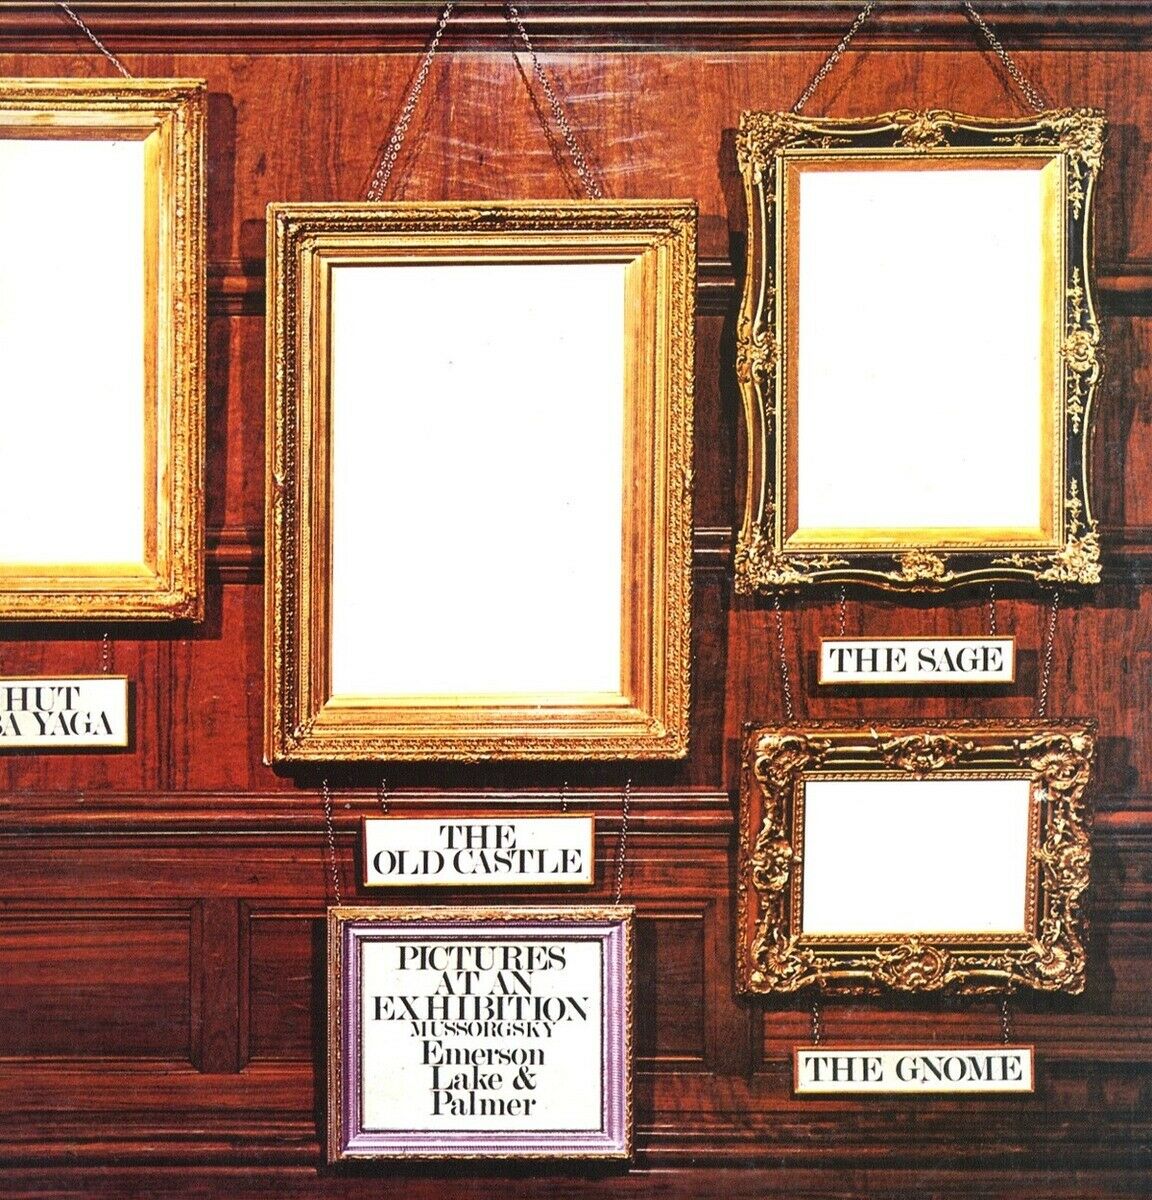 Emerson, Lake & Palmer - Pictures At an Exhibition